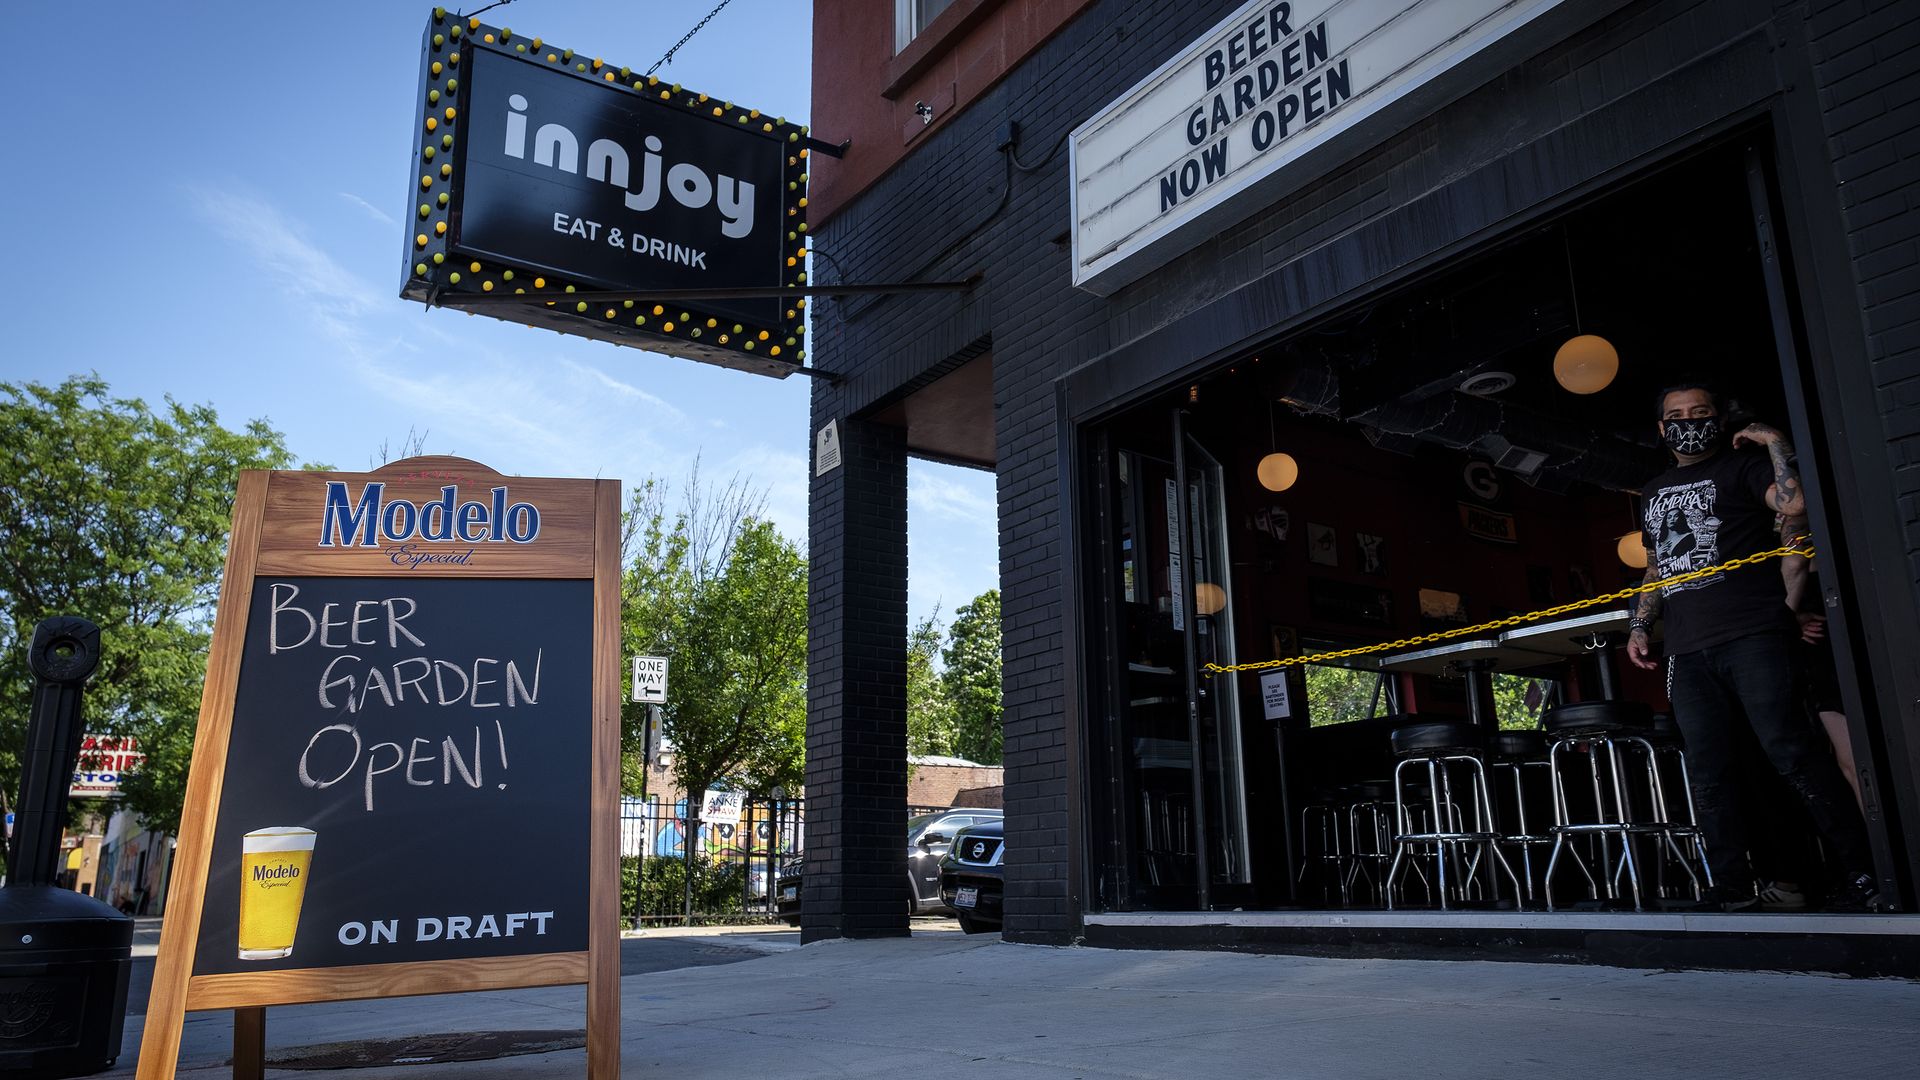 Signs indicate the beer garden is open at the Innjoy bar in Chicago, Illinois.